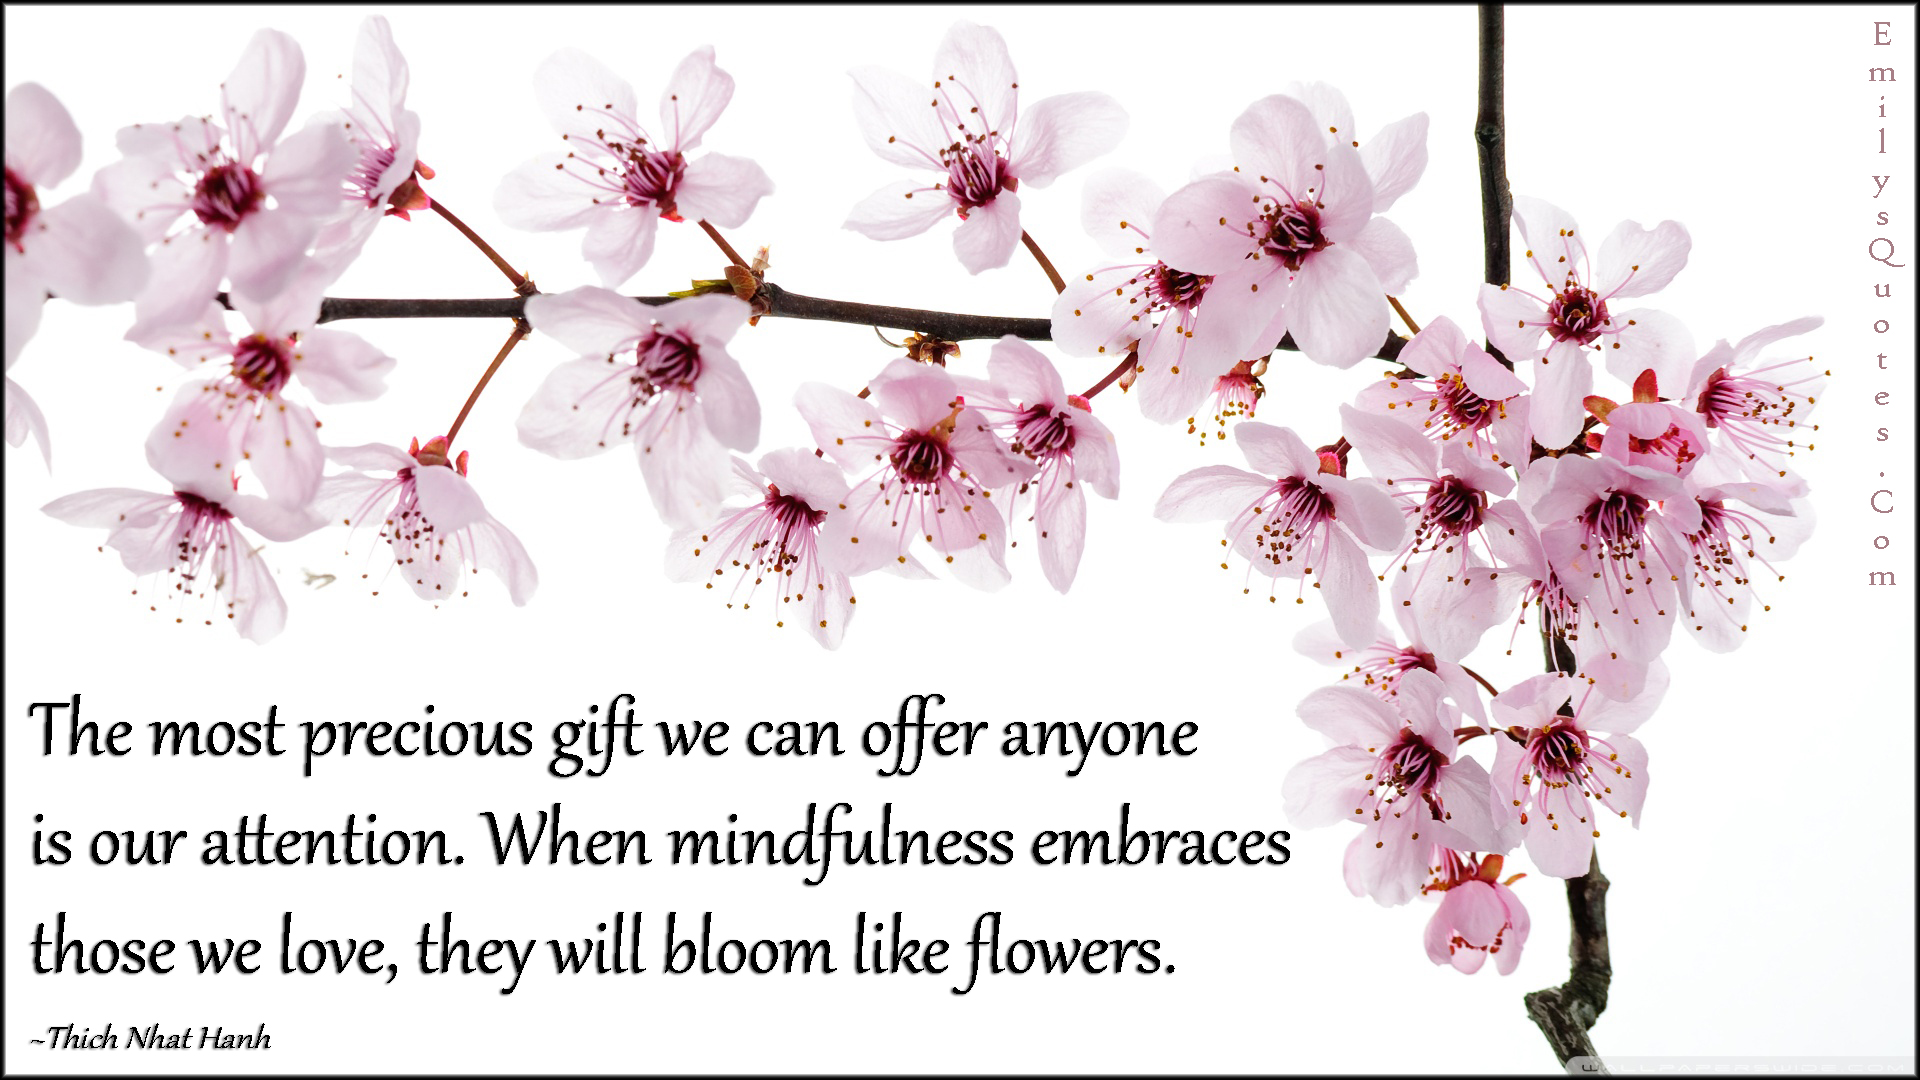 The most precious gift we can offer anyone is our attention. When mindfulness embraces those we love, they will bloom like flowers